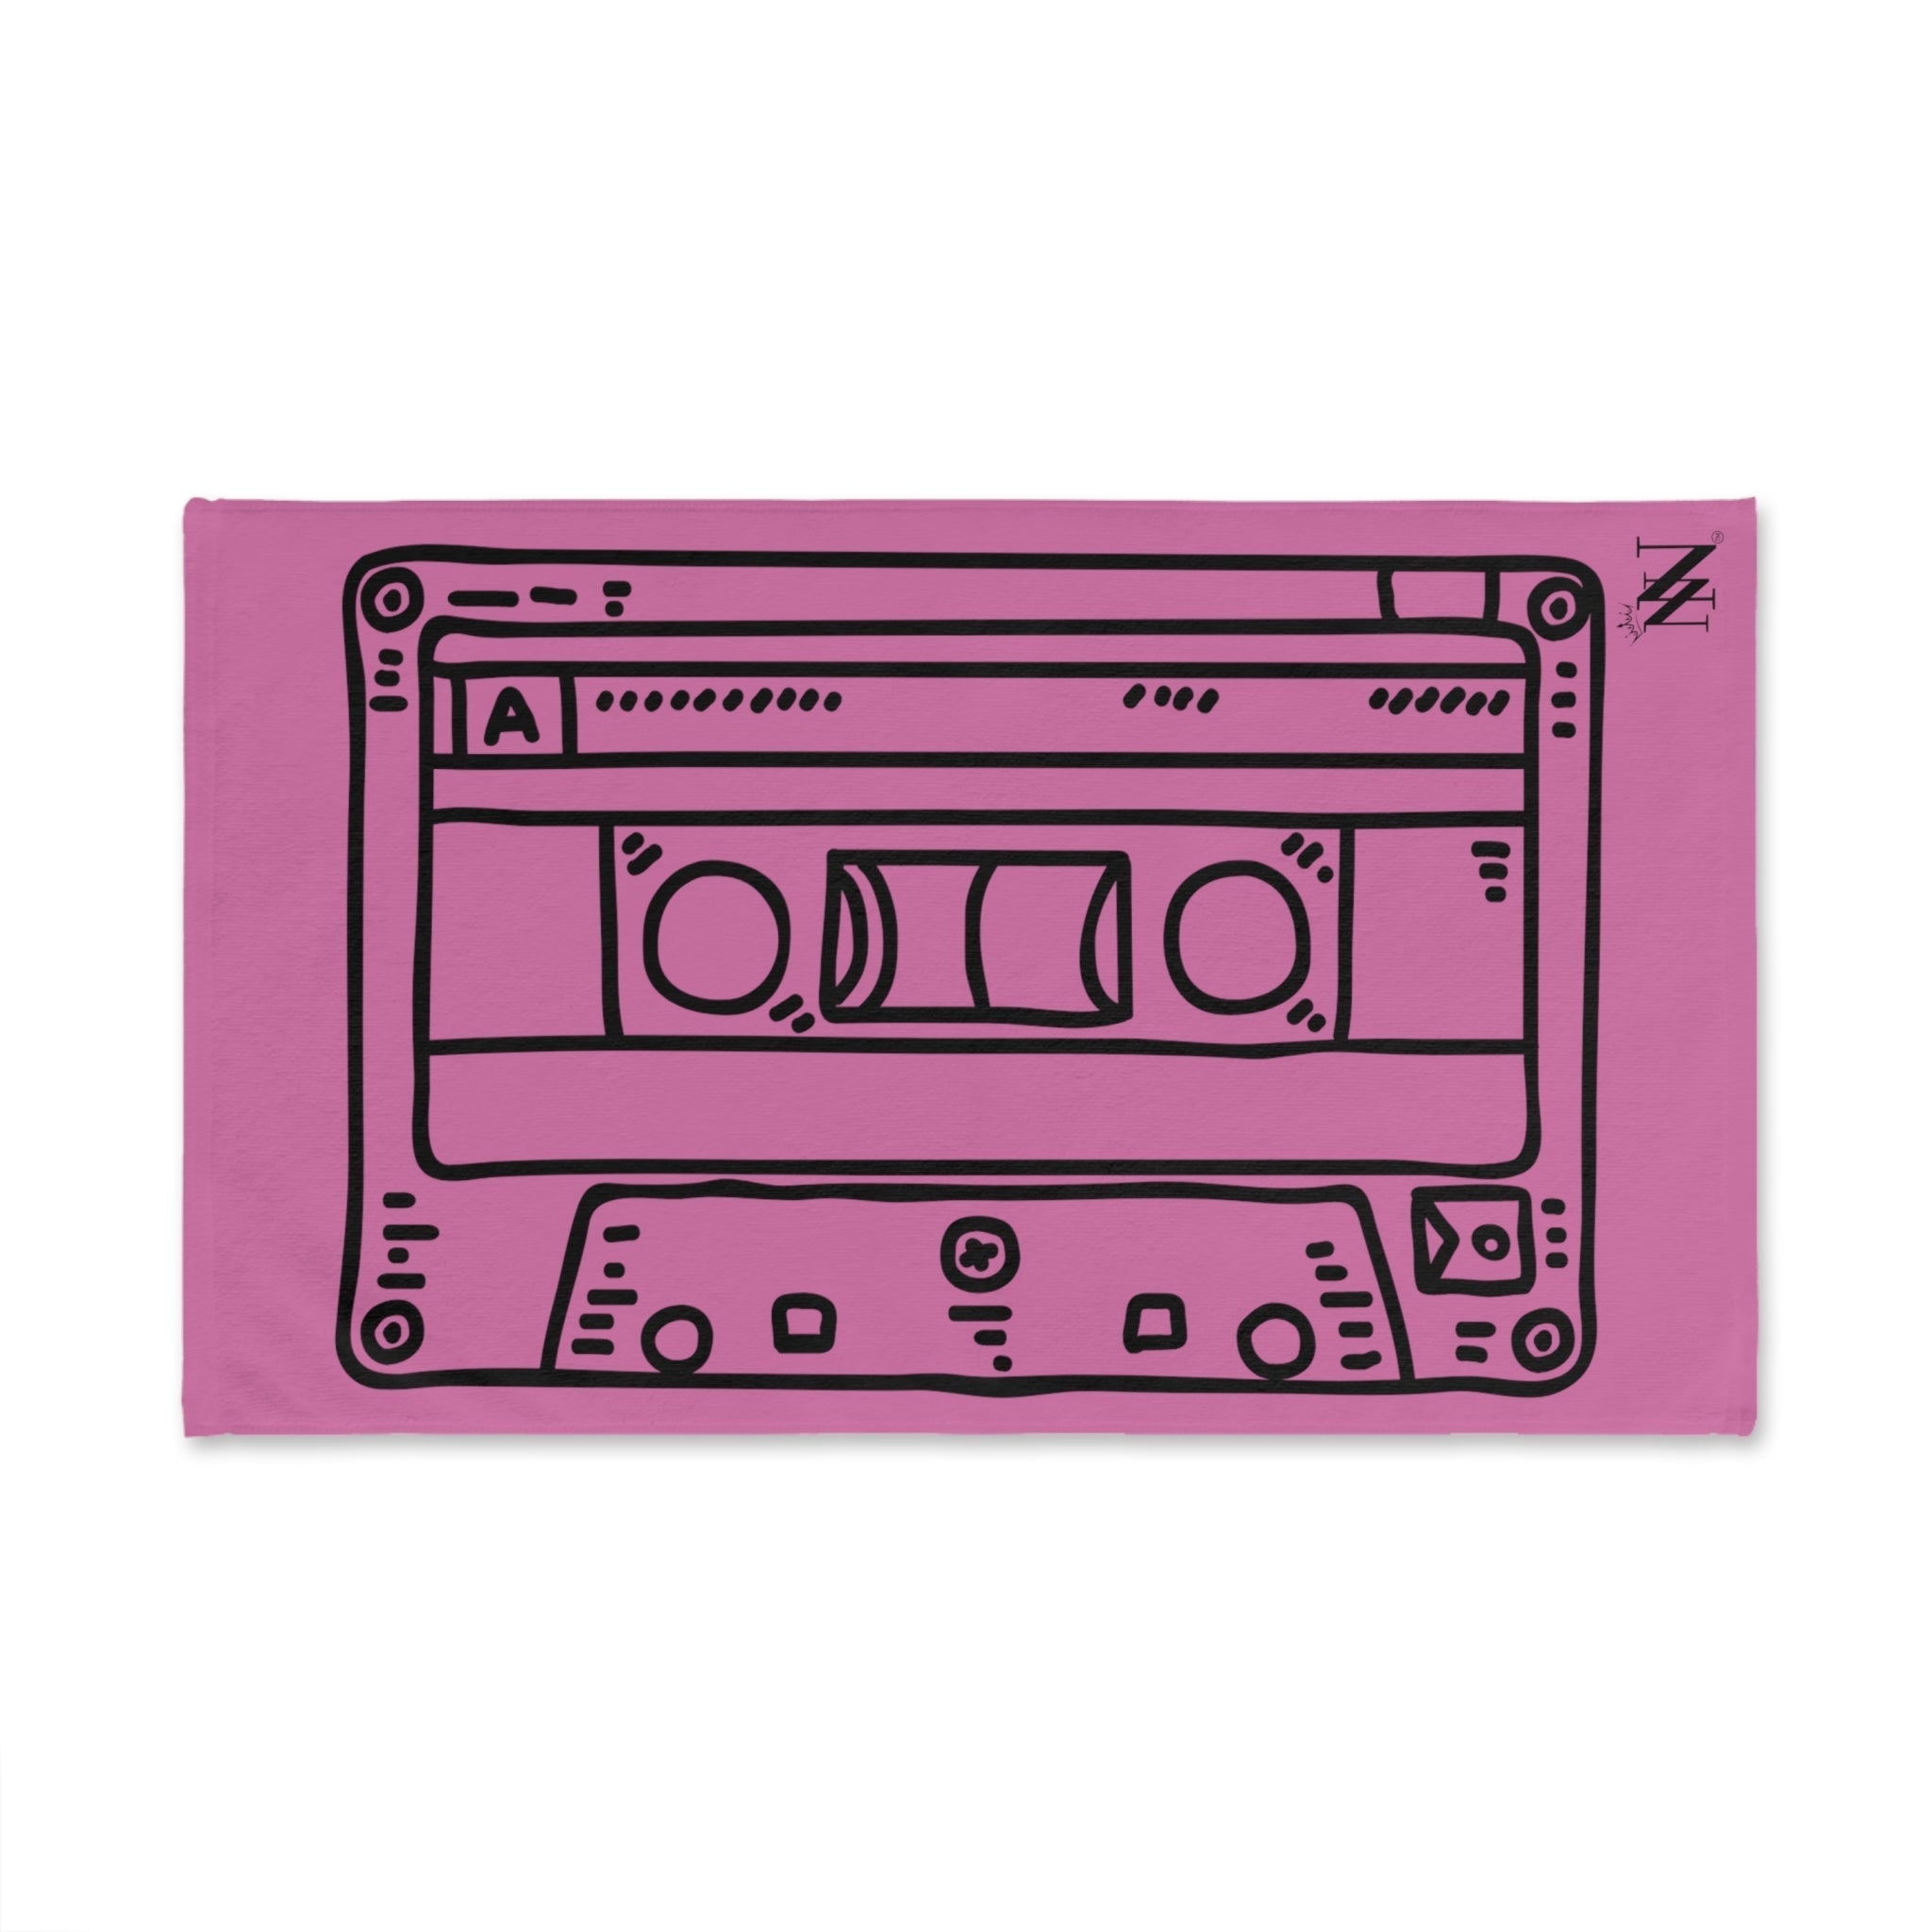 Cassette Black 80sPink | Novelty Gifts for Boyfriend, Funny Towel Romantic Gift for Wedding Couple Fiance First Year Anniversary Valentines, Party Gag Gifts, Joke Humor Cloth for Husband Men BF NECTAR NAPKINS